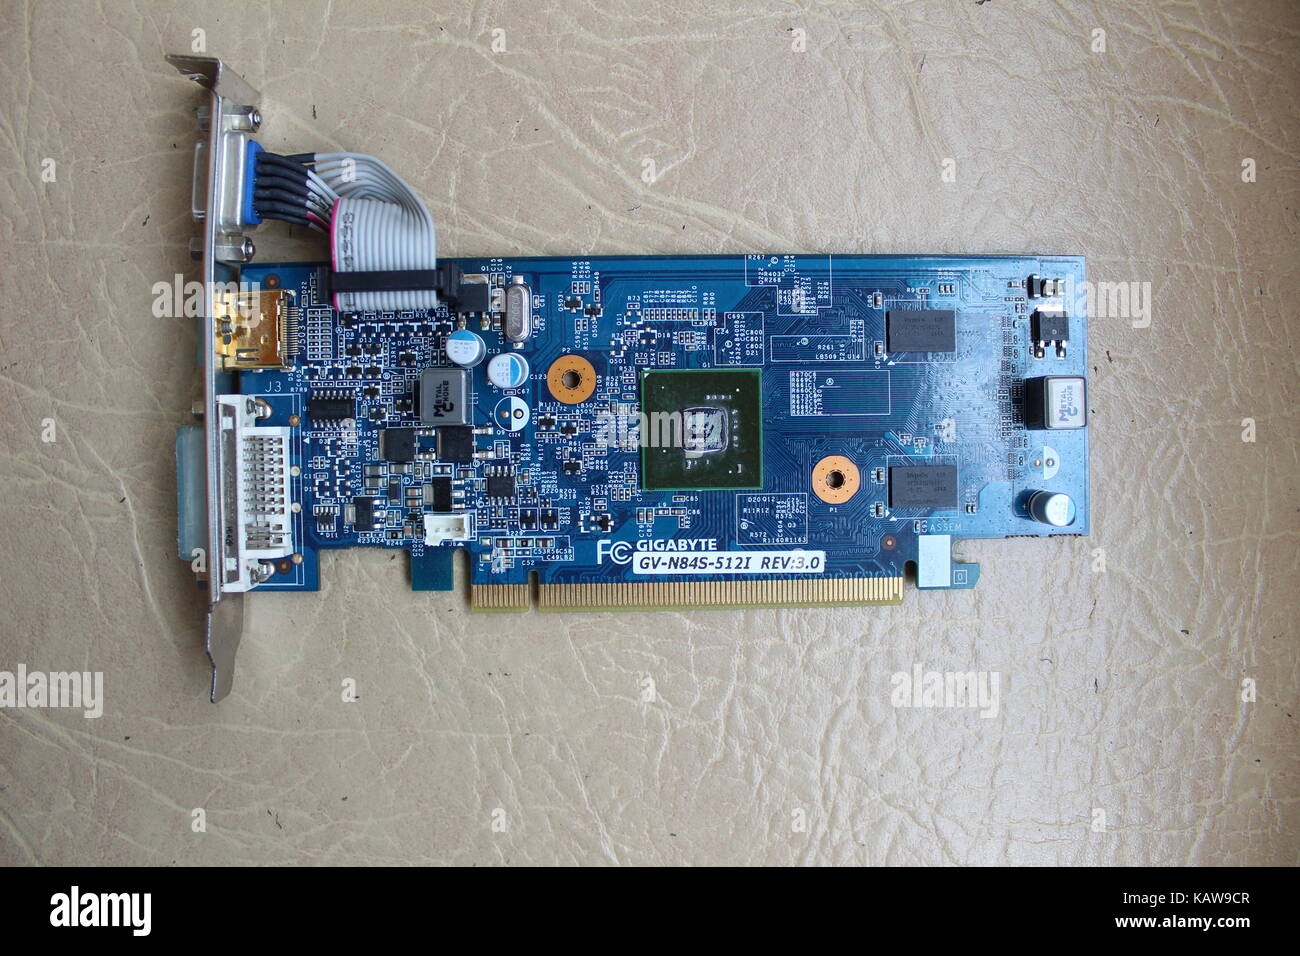 Old graphics card for a computer from the company "Gigabyte Stock Photo -  Alamy